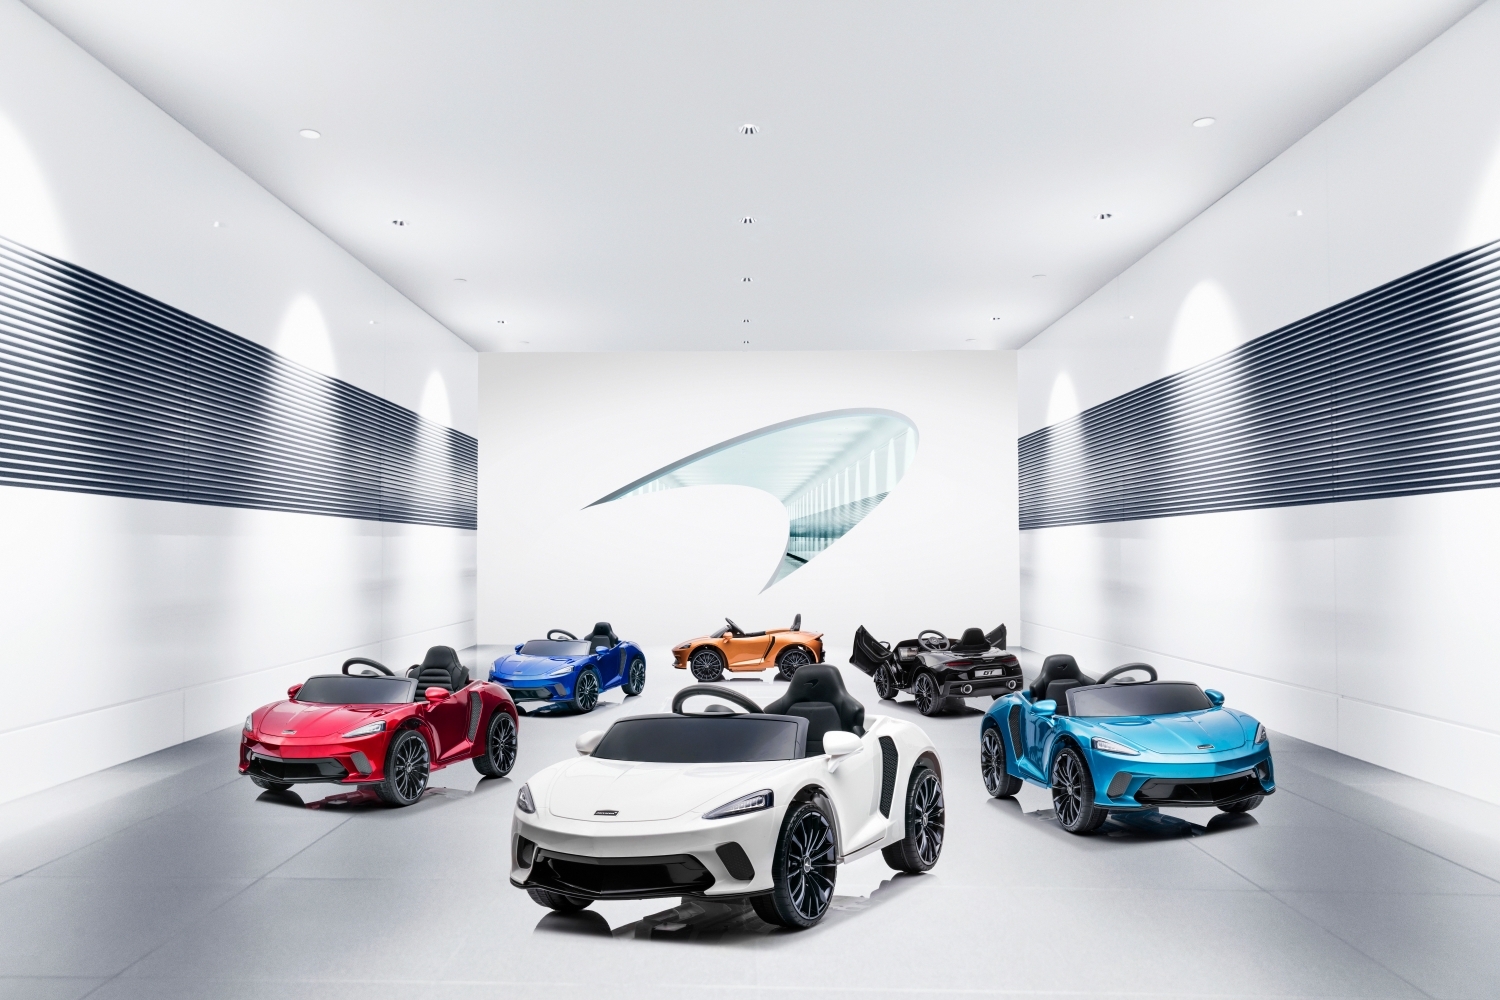 The New McLaren GT Ride-On: The Talk of the Playground